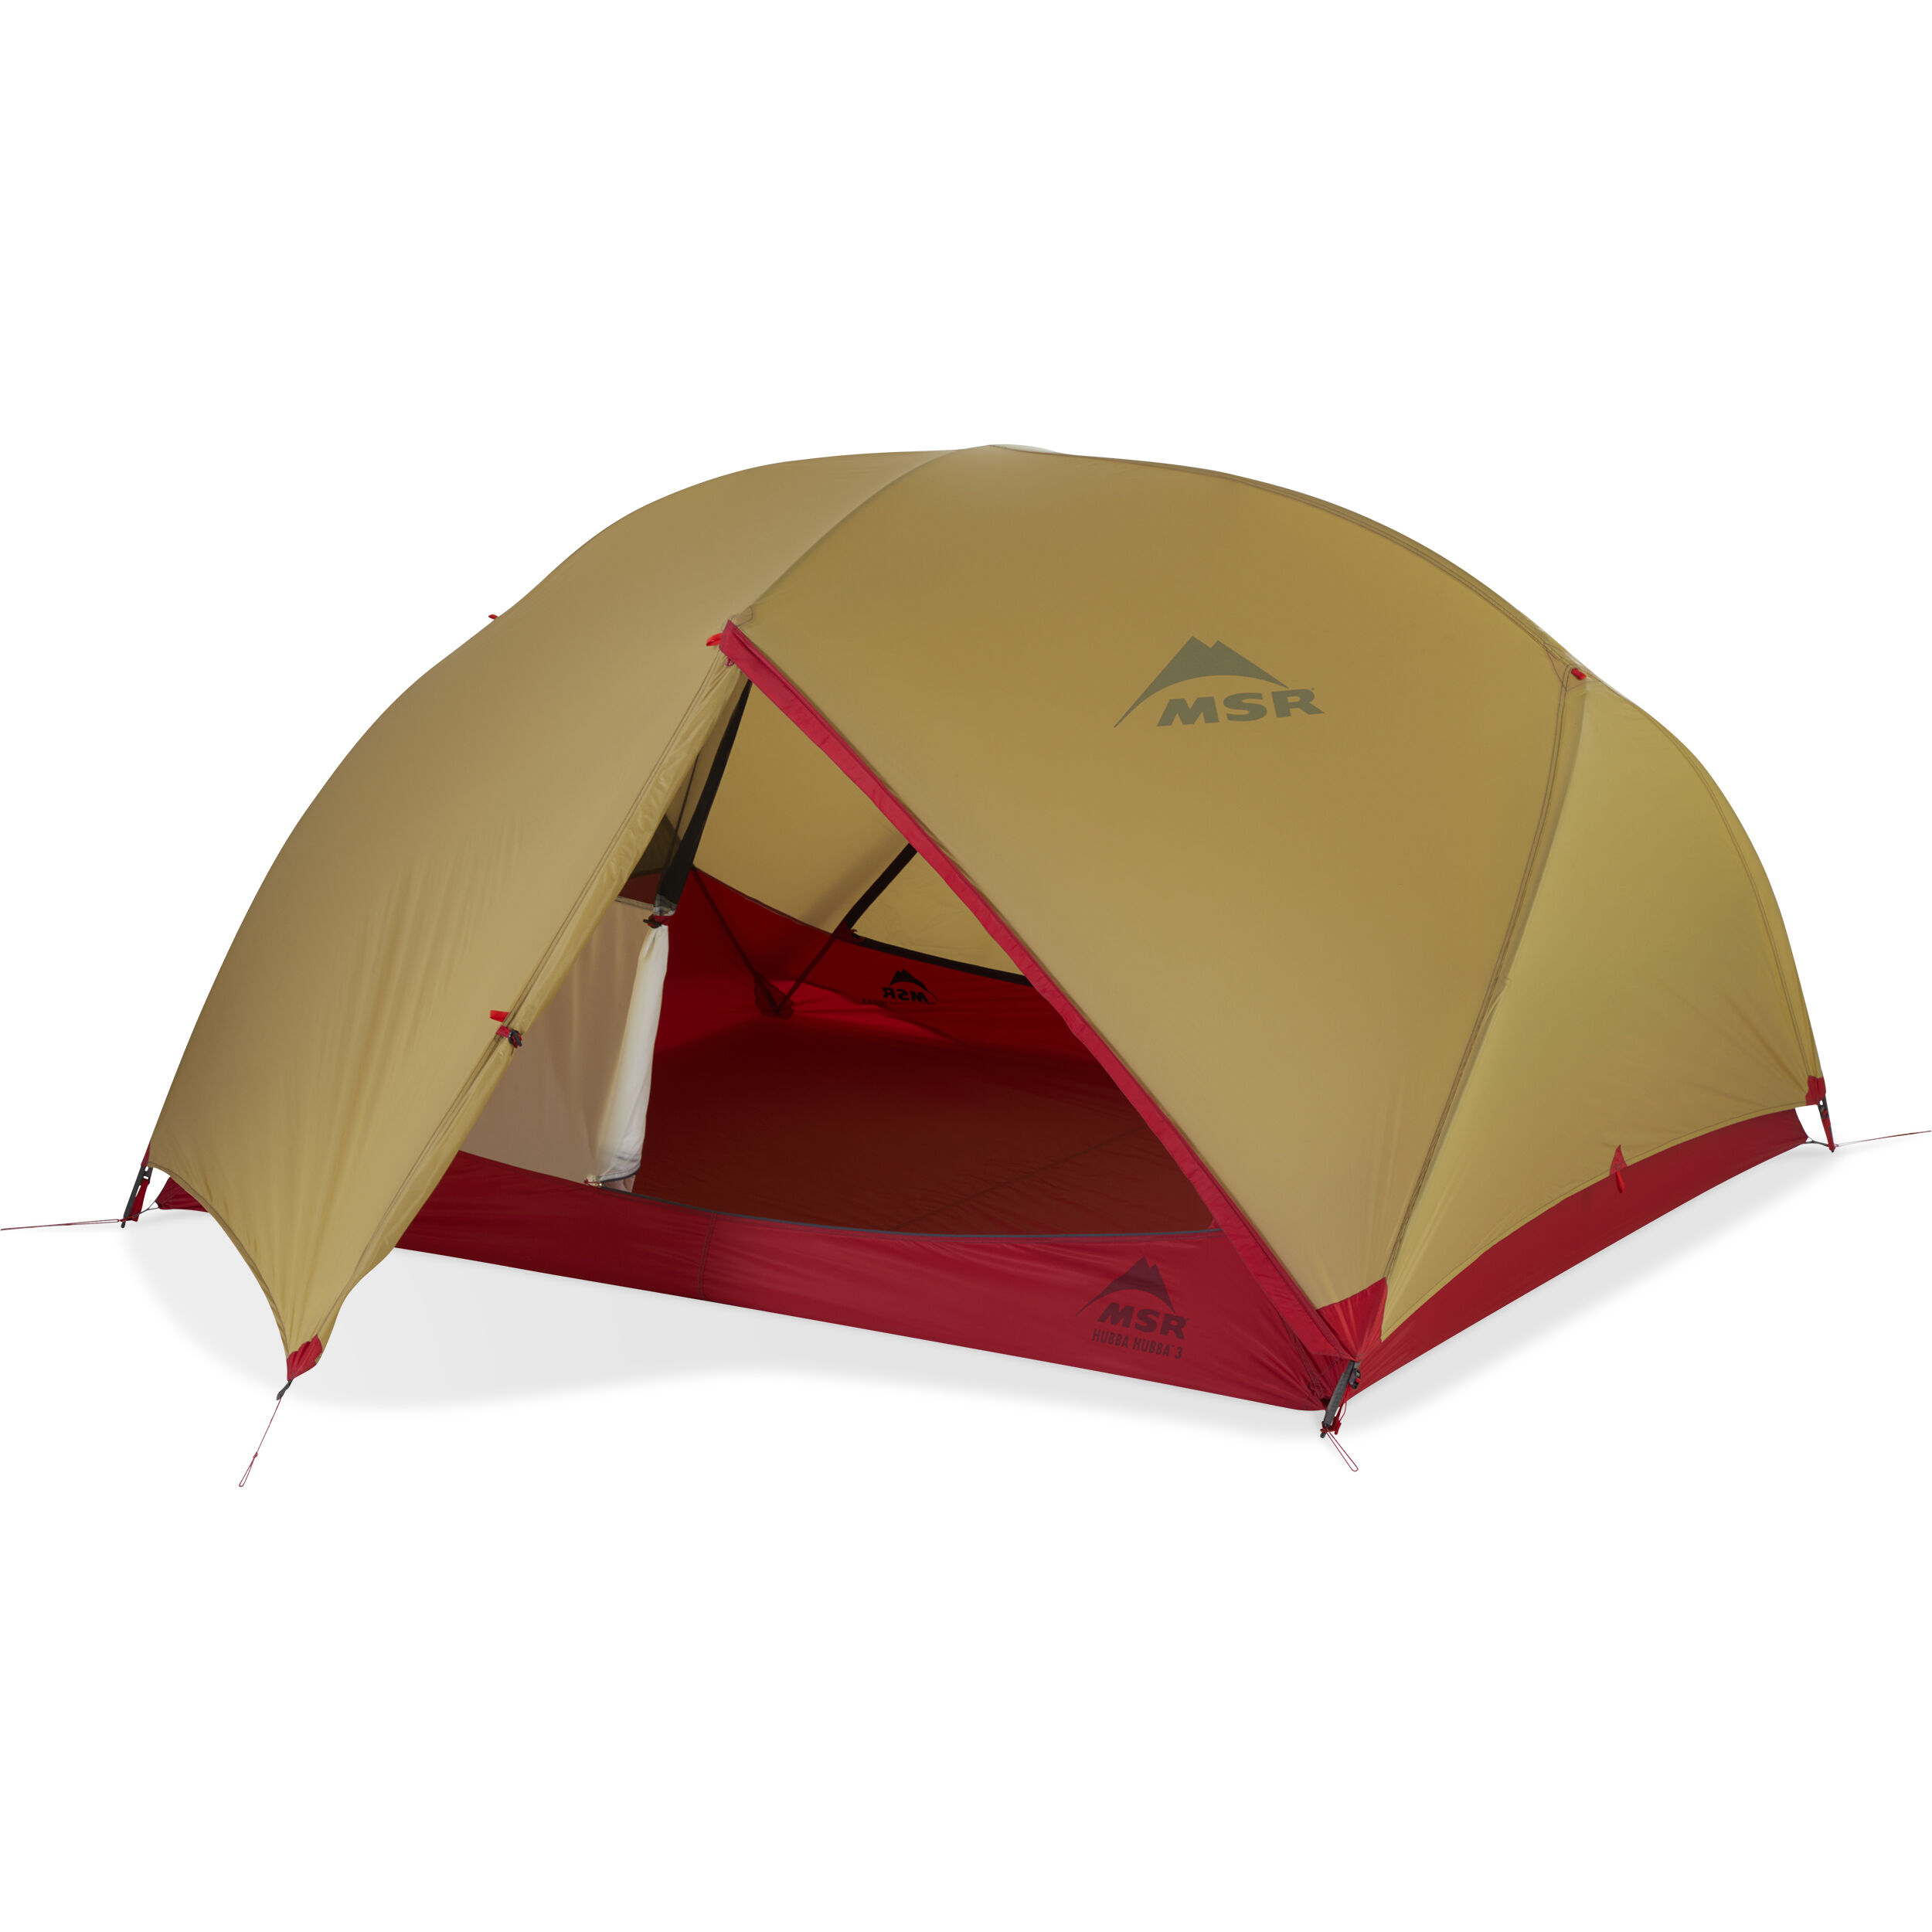 Best Top Rated Tents to Buy Reviewed Jan 2023 | OptimumTents